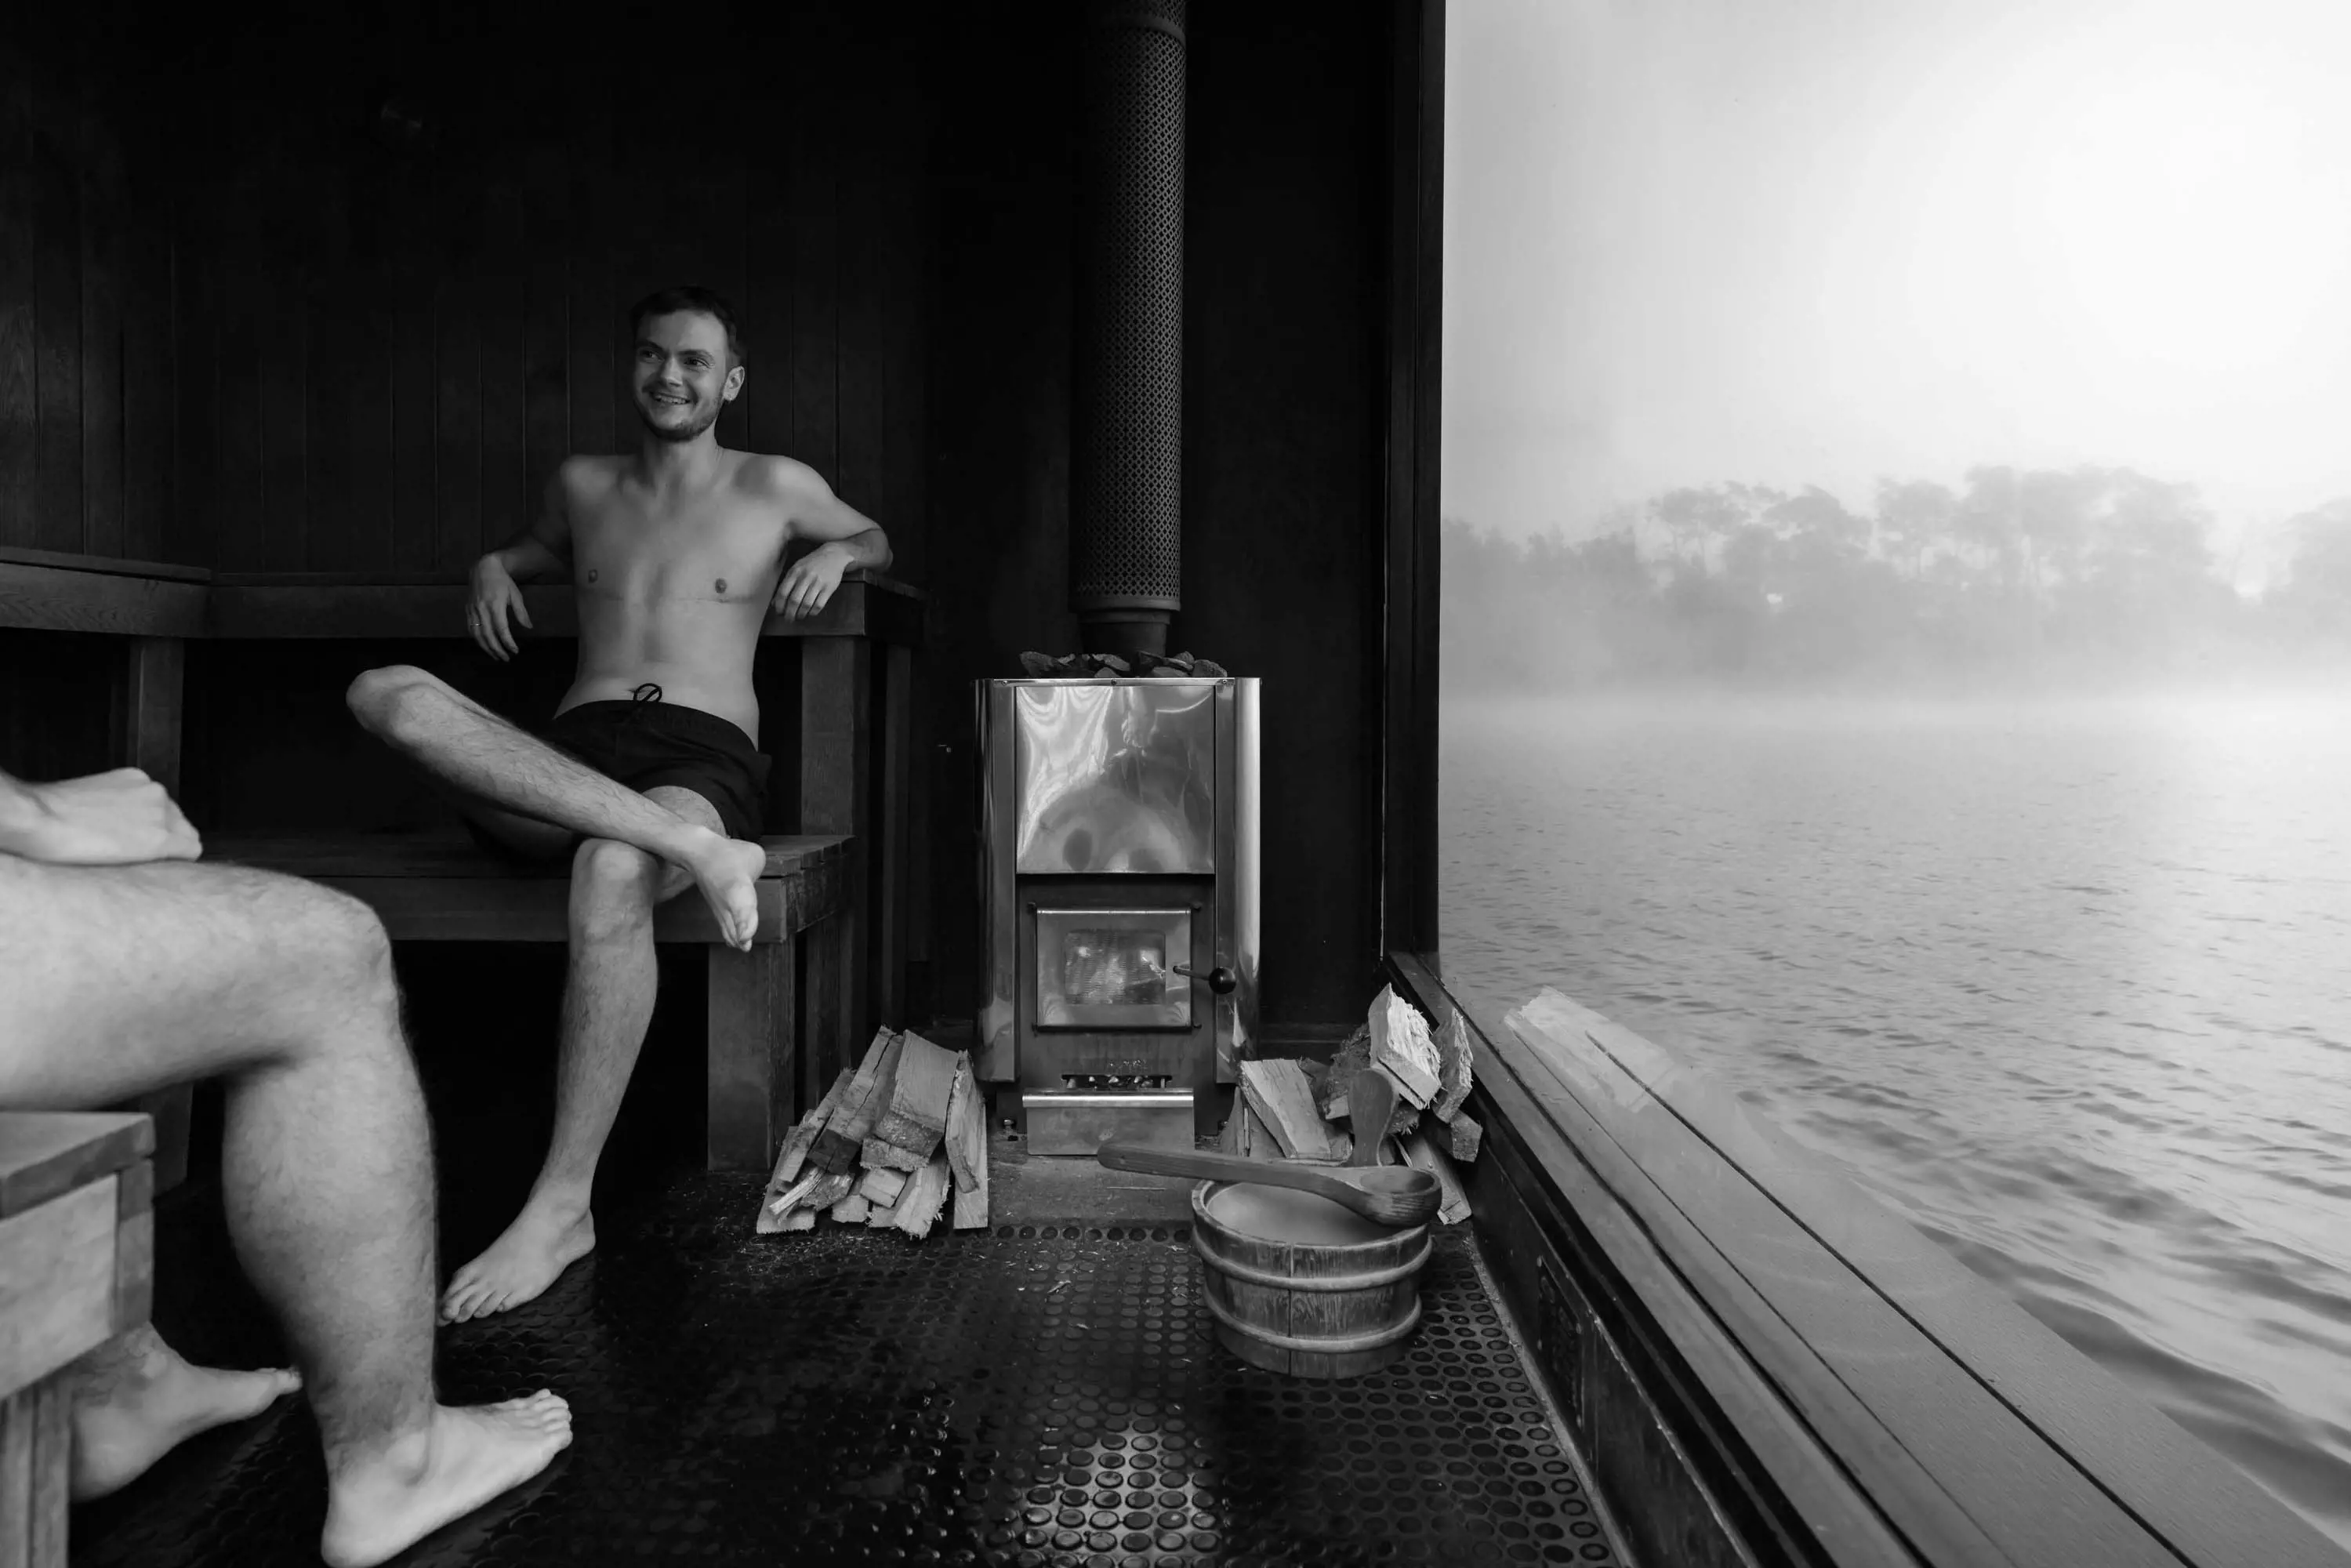 A couple sit inside a large sauna room with a floor-to-ceiling window looking out over a misty lake.